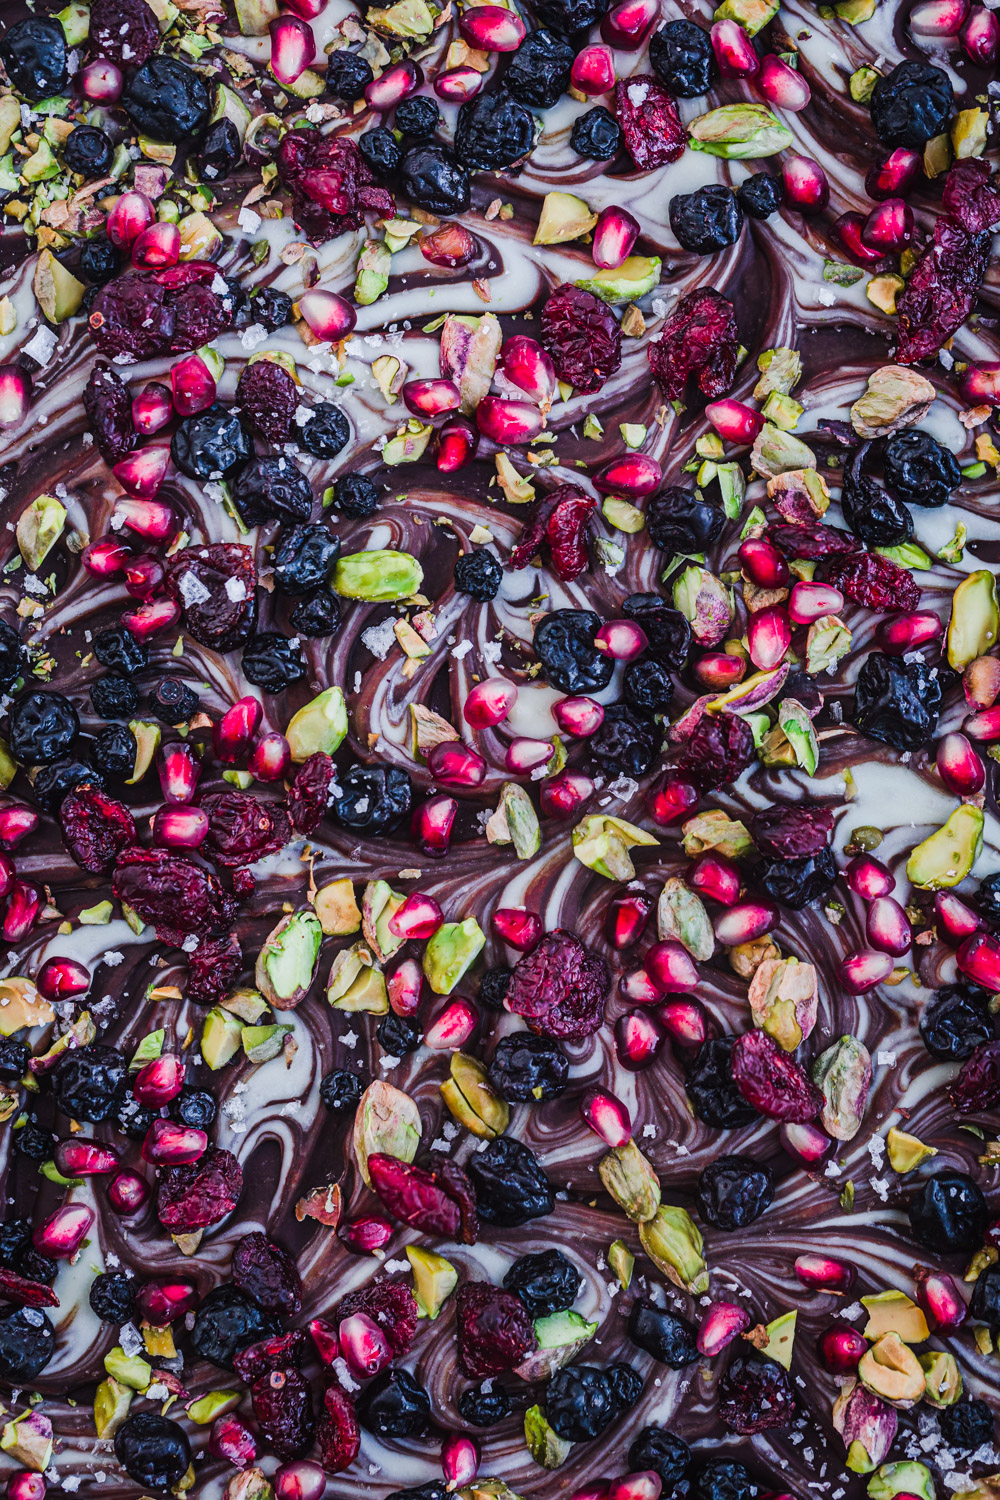 Dark chocolate bark with a white chocolate swirl, nuts, and dried fruit.